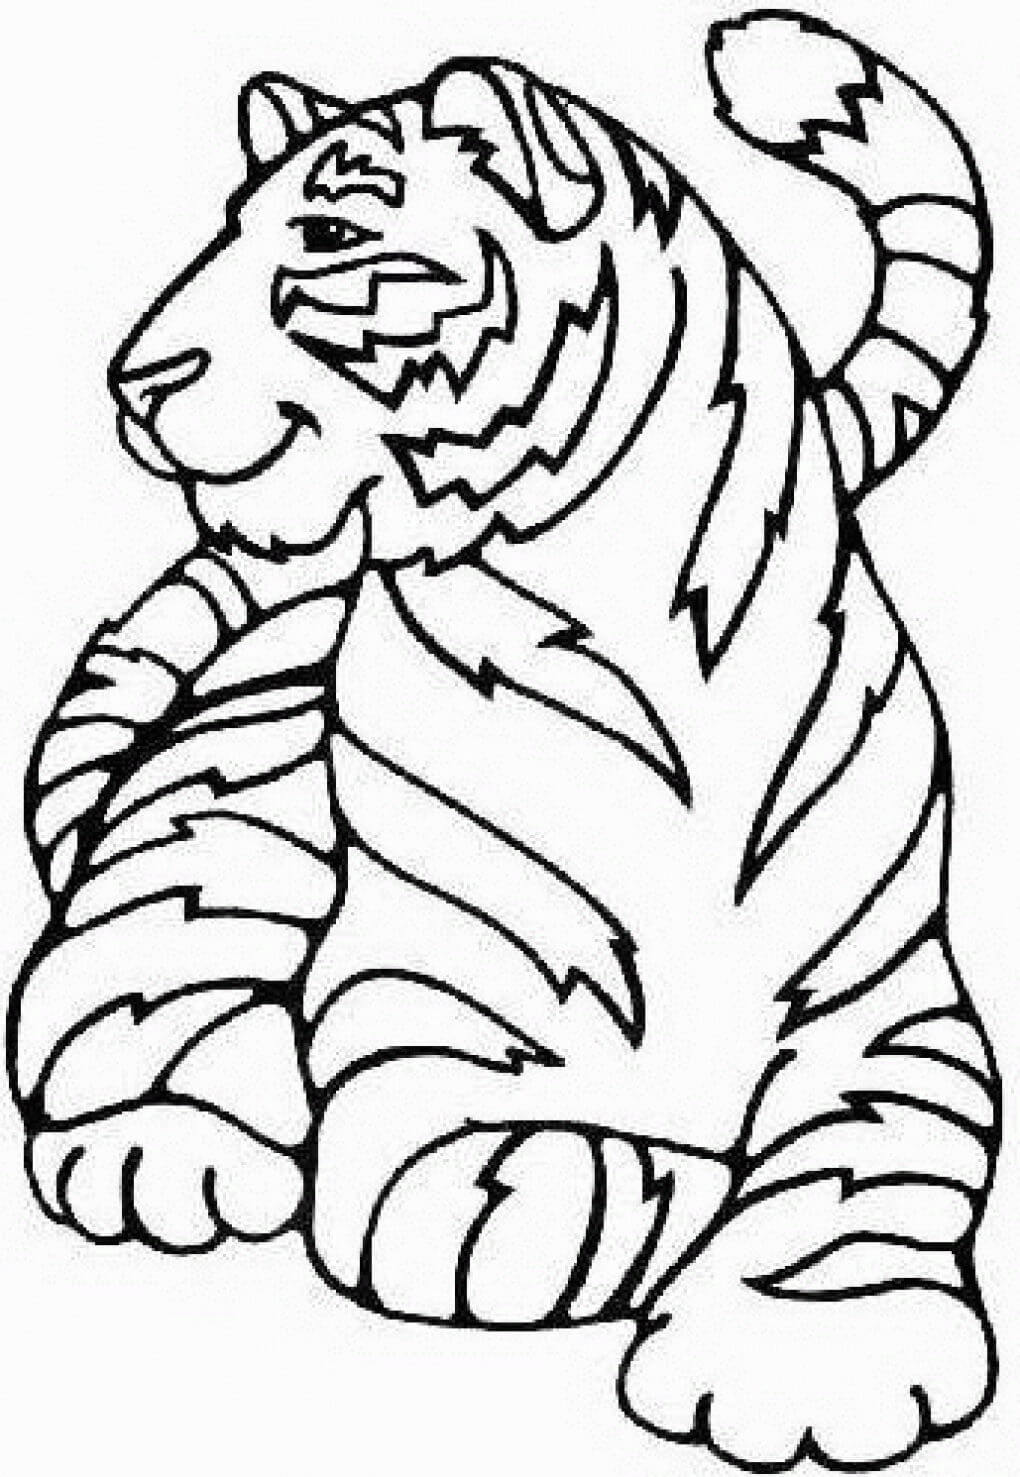 Hunting Tiger Animal - Downloadable Animal Coloring Sheets for Children